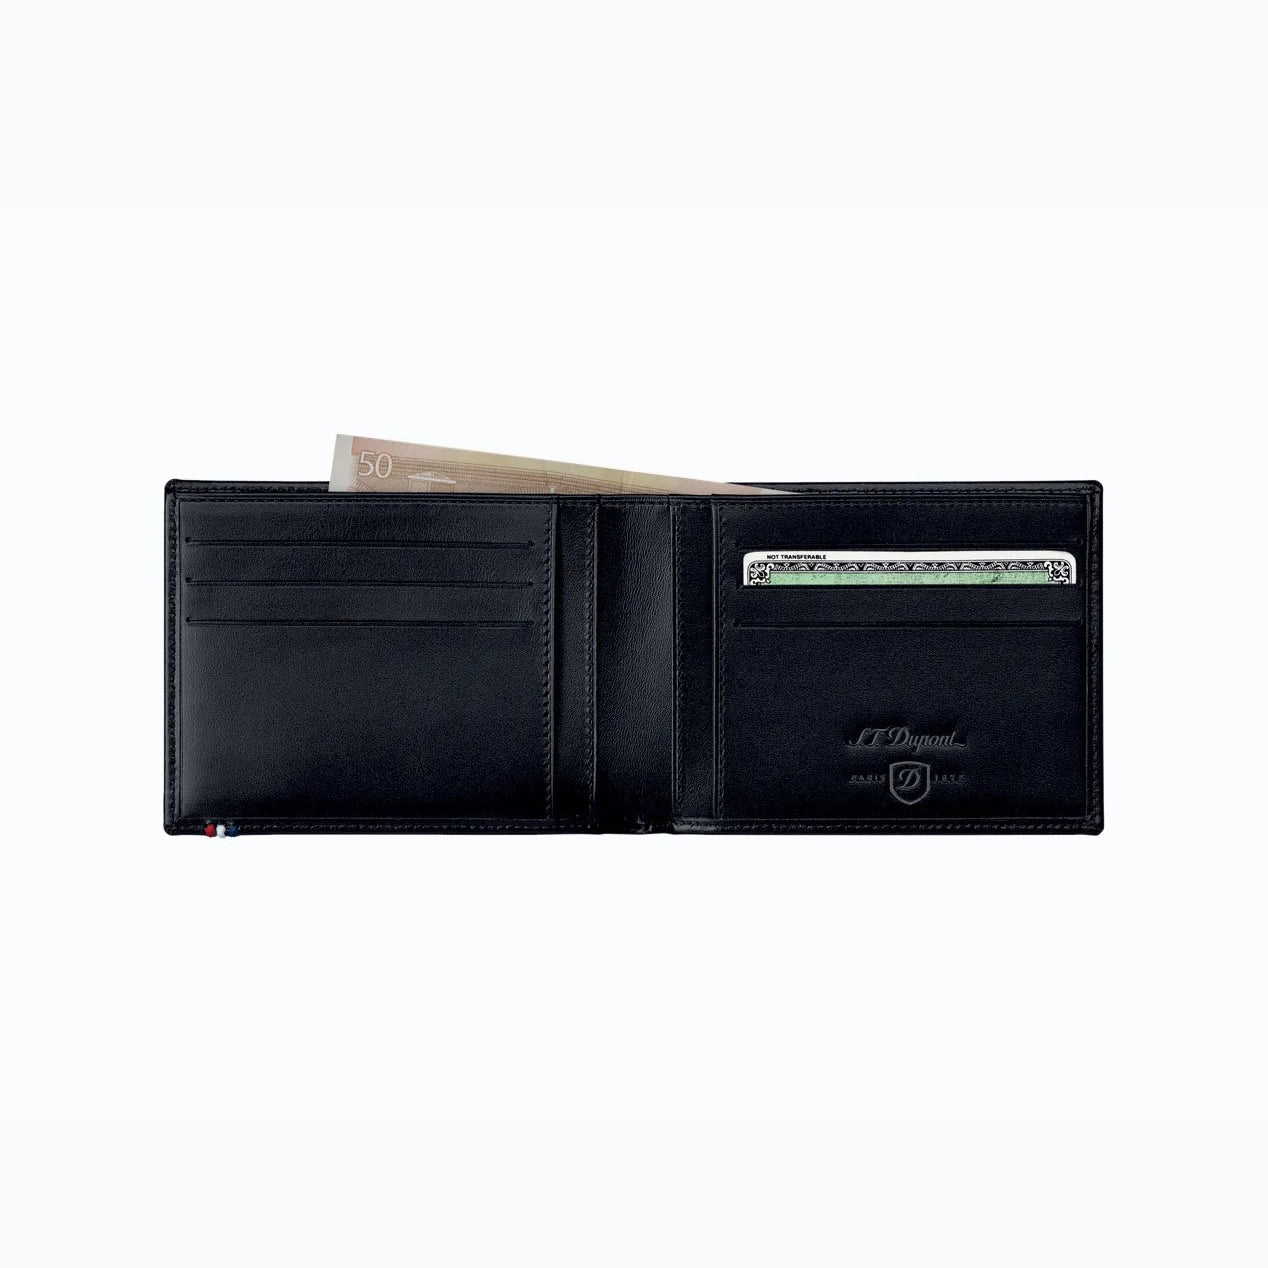 DUPONT ACCESSORIES S.T.DUPONT LINE D BLACK SMOOTH LEATHER WALLET-6-CREDIT CARD SLOTS AND ID CARD SLOT